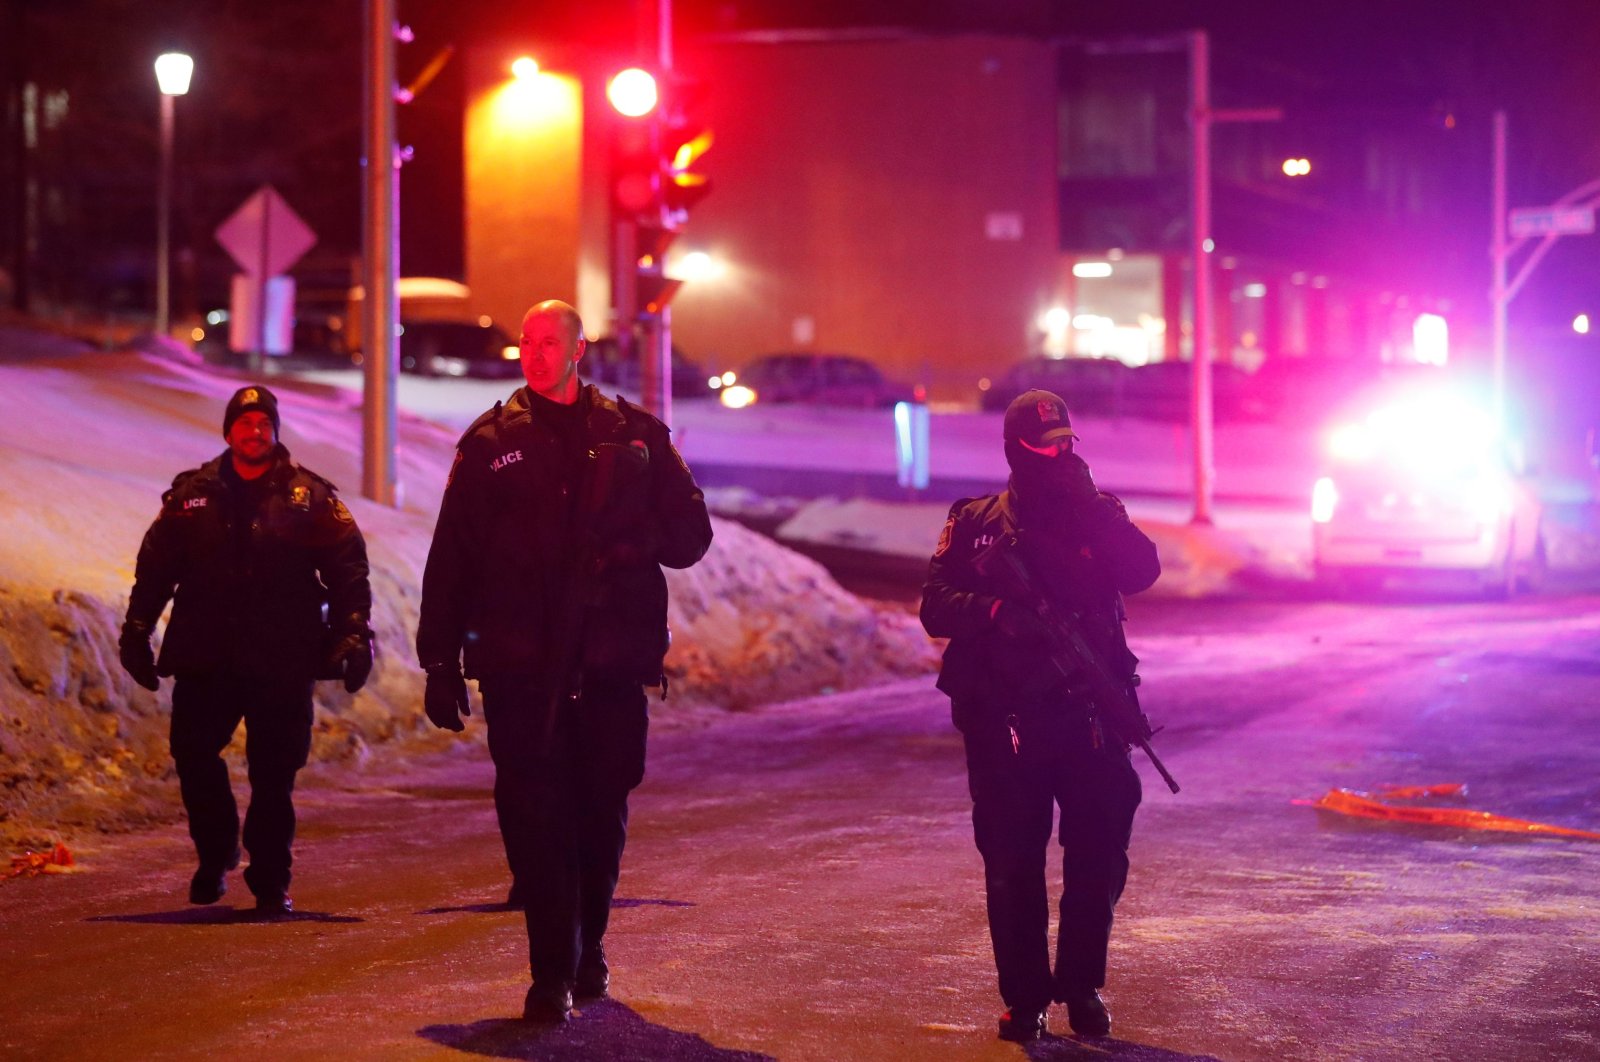 Police officers patrol the perimeter near a mosque after another mosque shooting in Quebec City, Canada, Jan. 29, 2017. (Reuters Files Photo)